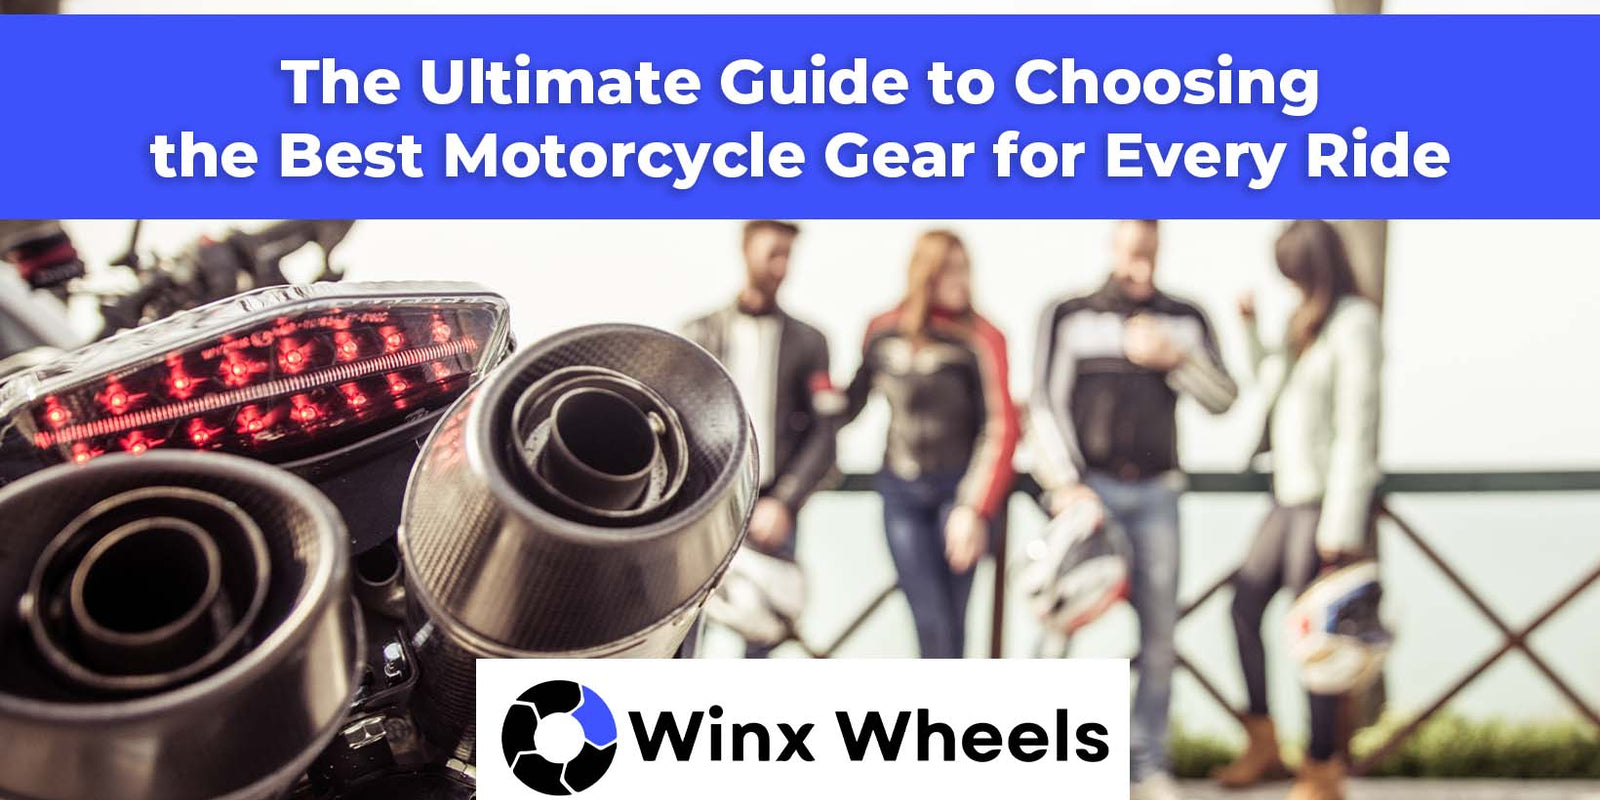 5 Essential Accessories Every Motorcycle Enthusiast Needs